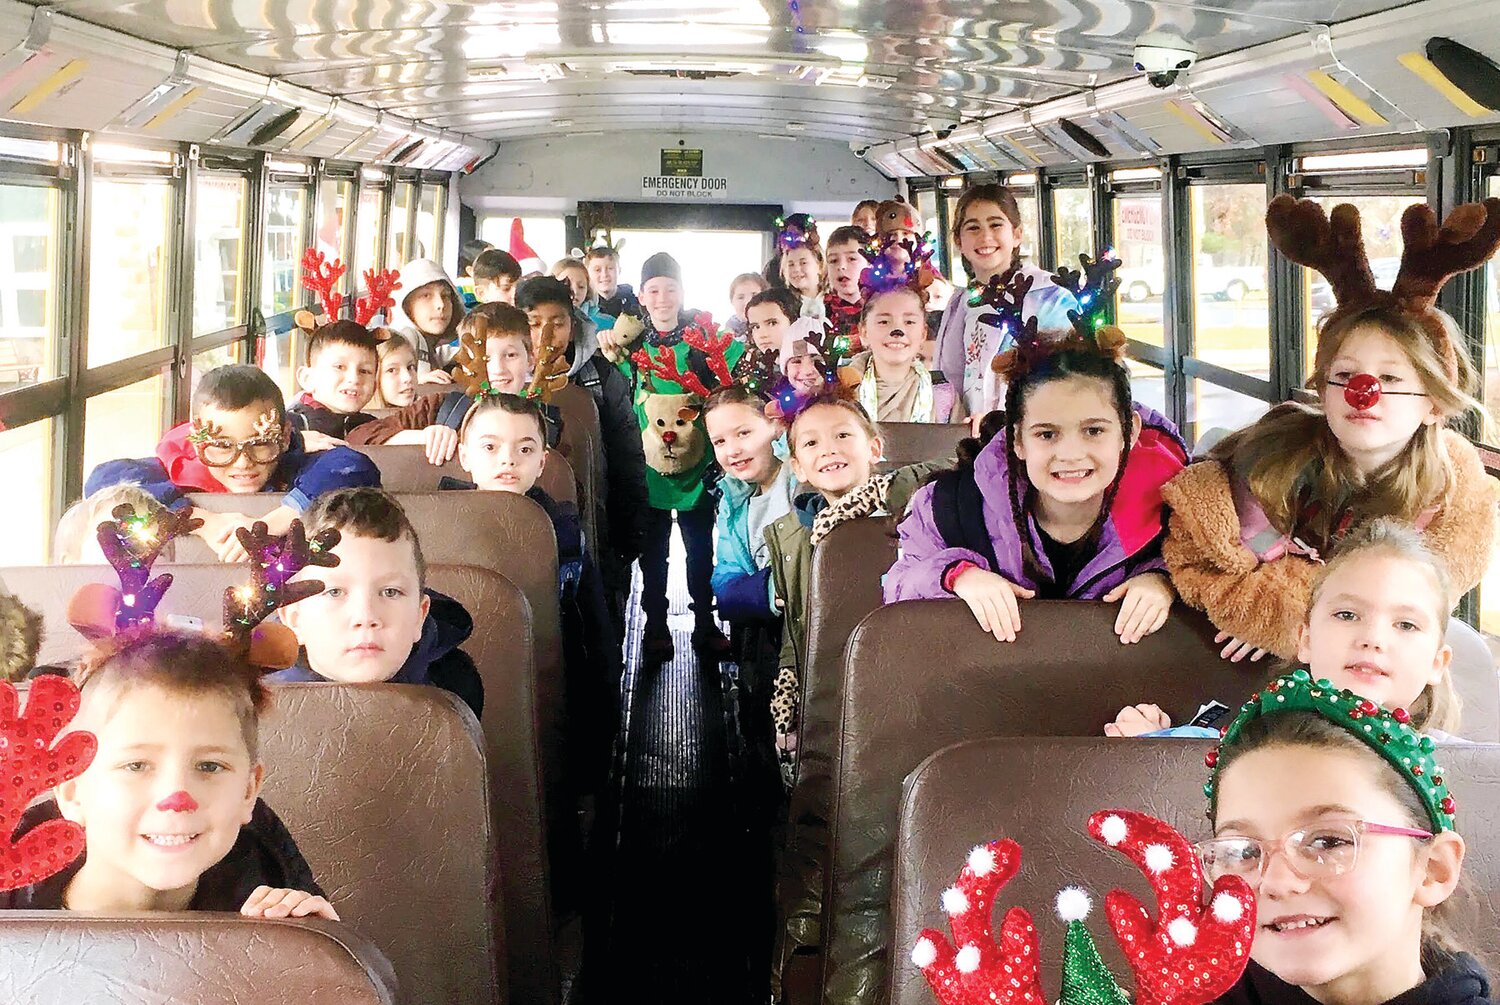 Children aboard the bus are dressed for the holidays.